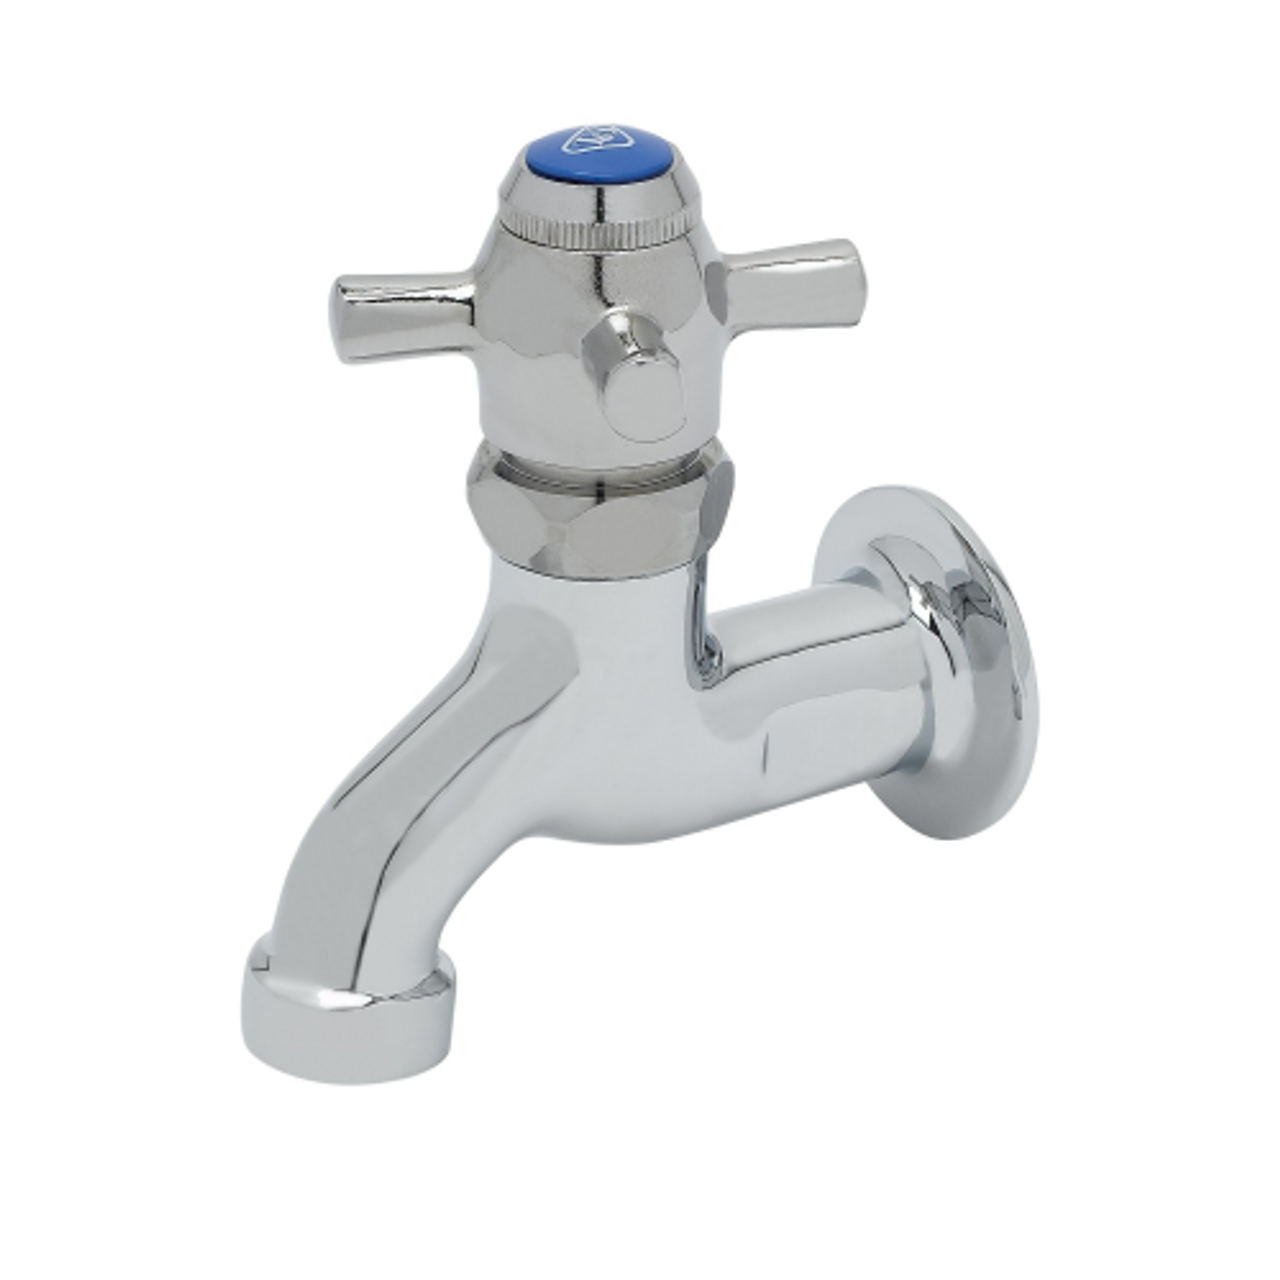 4-Arm Handle and Plain Outlet T&S Brass B-0700 Sill Faucet with 1/2-Inch Npt Female Inlet